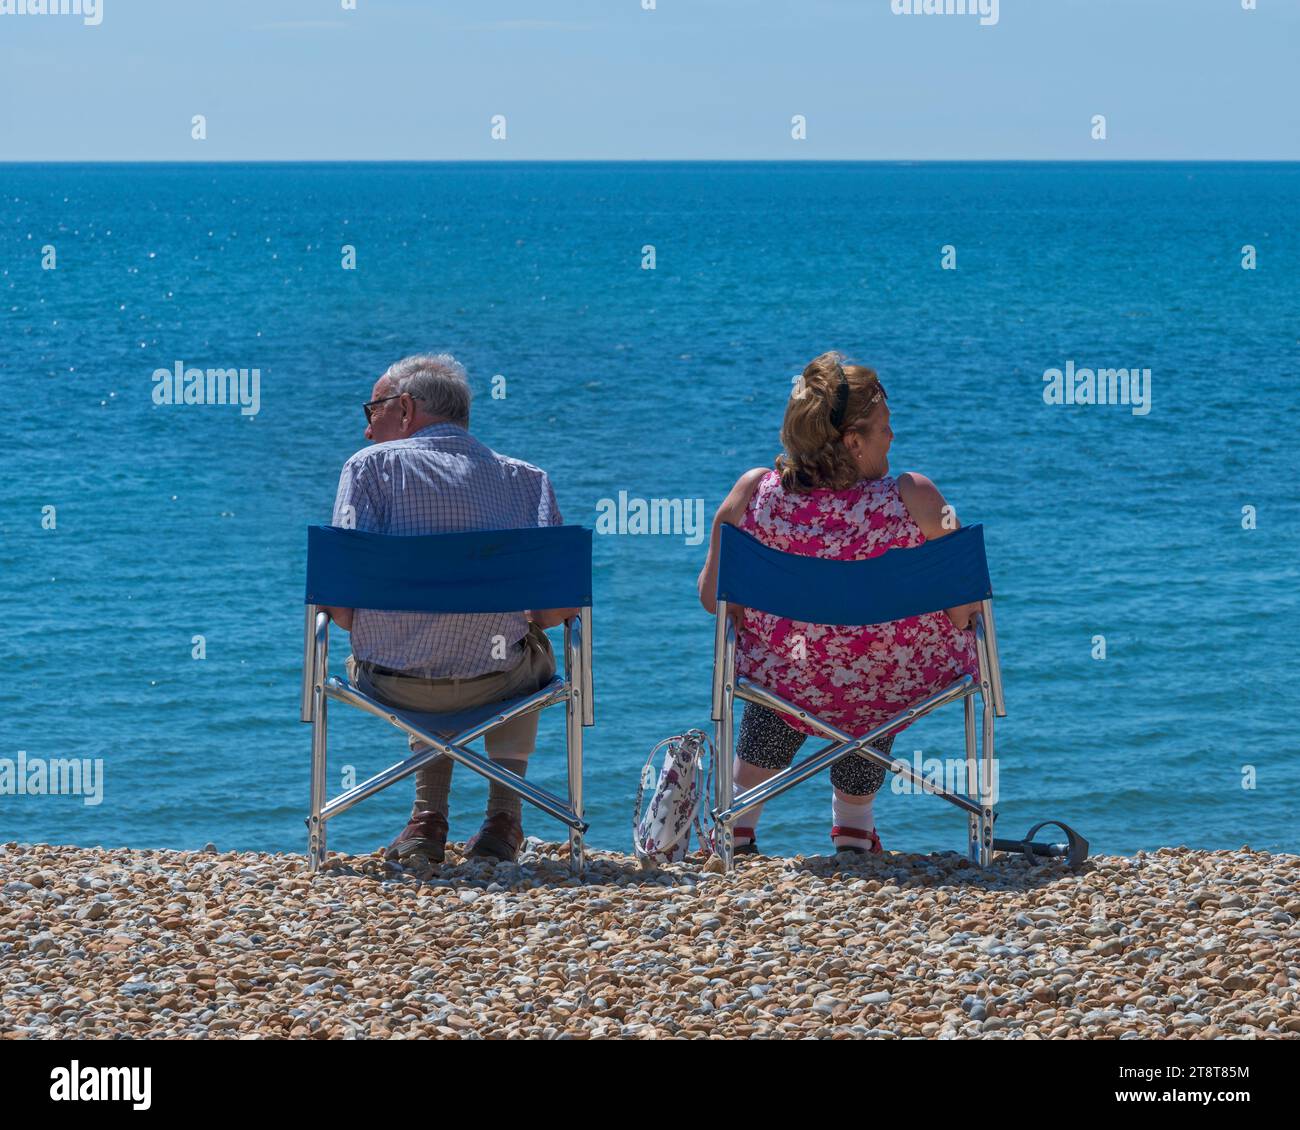 A couple sat on the stone beach in their fold up chairs, facing away from each other on the beach at Lyme Regis, Dorset, England, UK Stock Photo